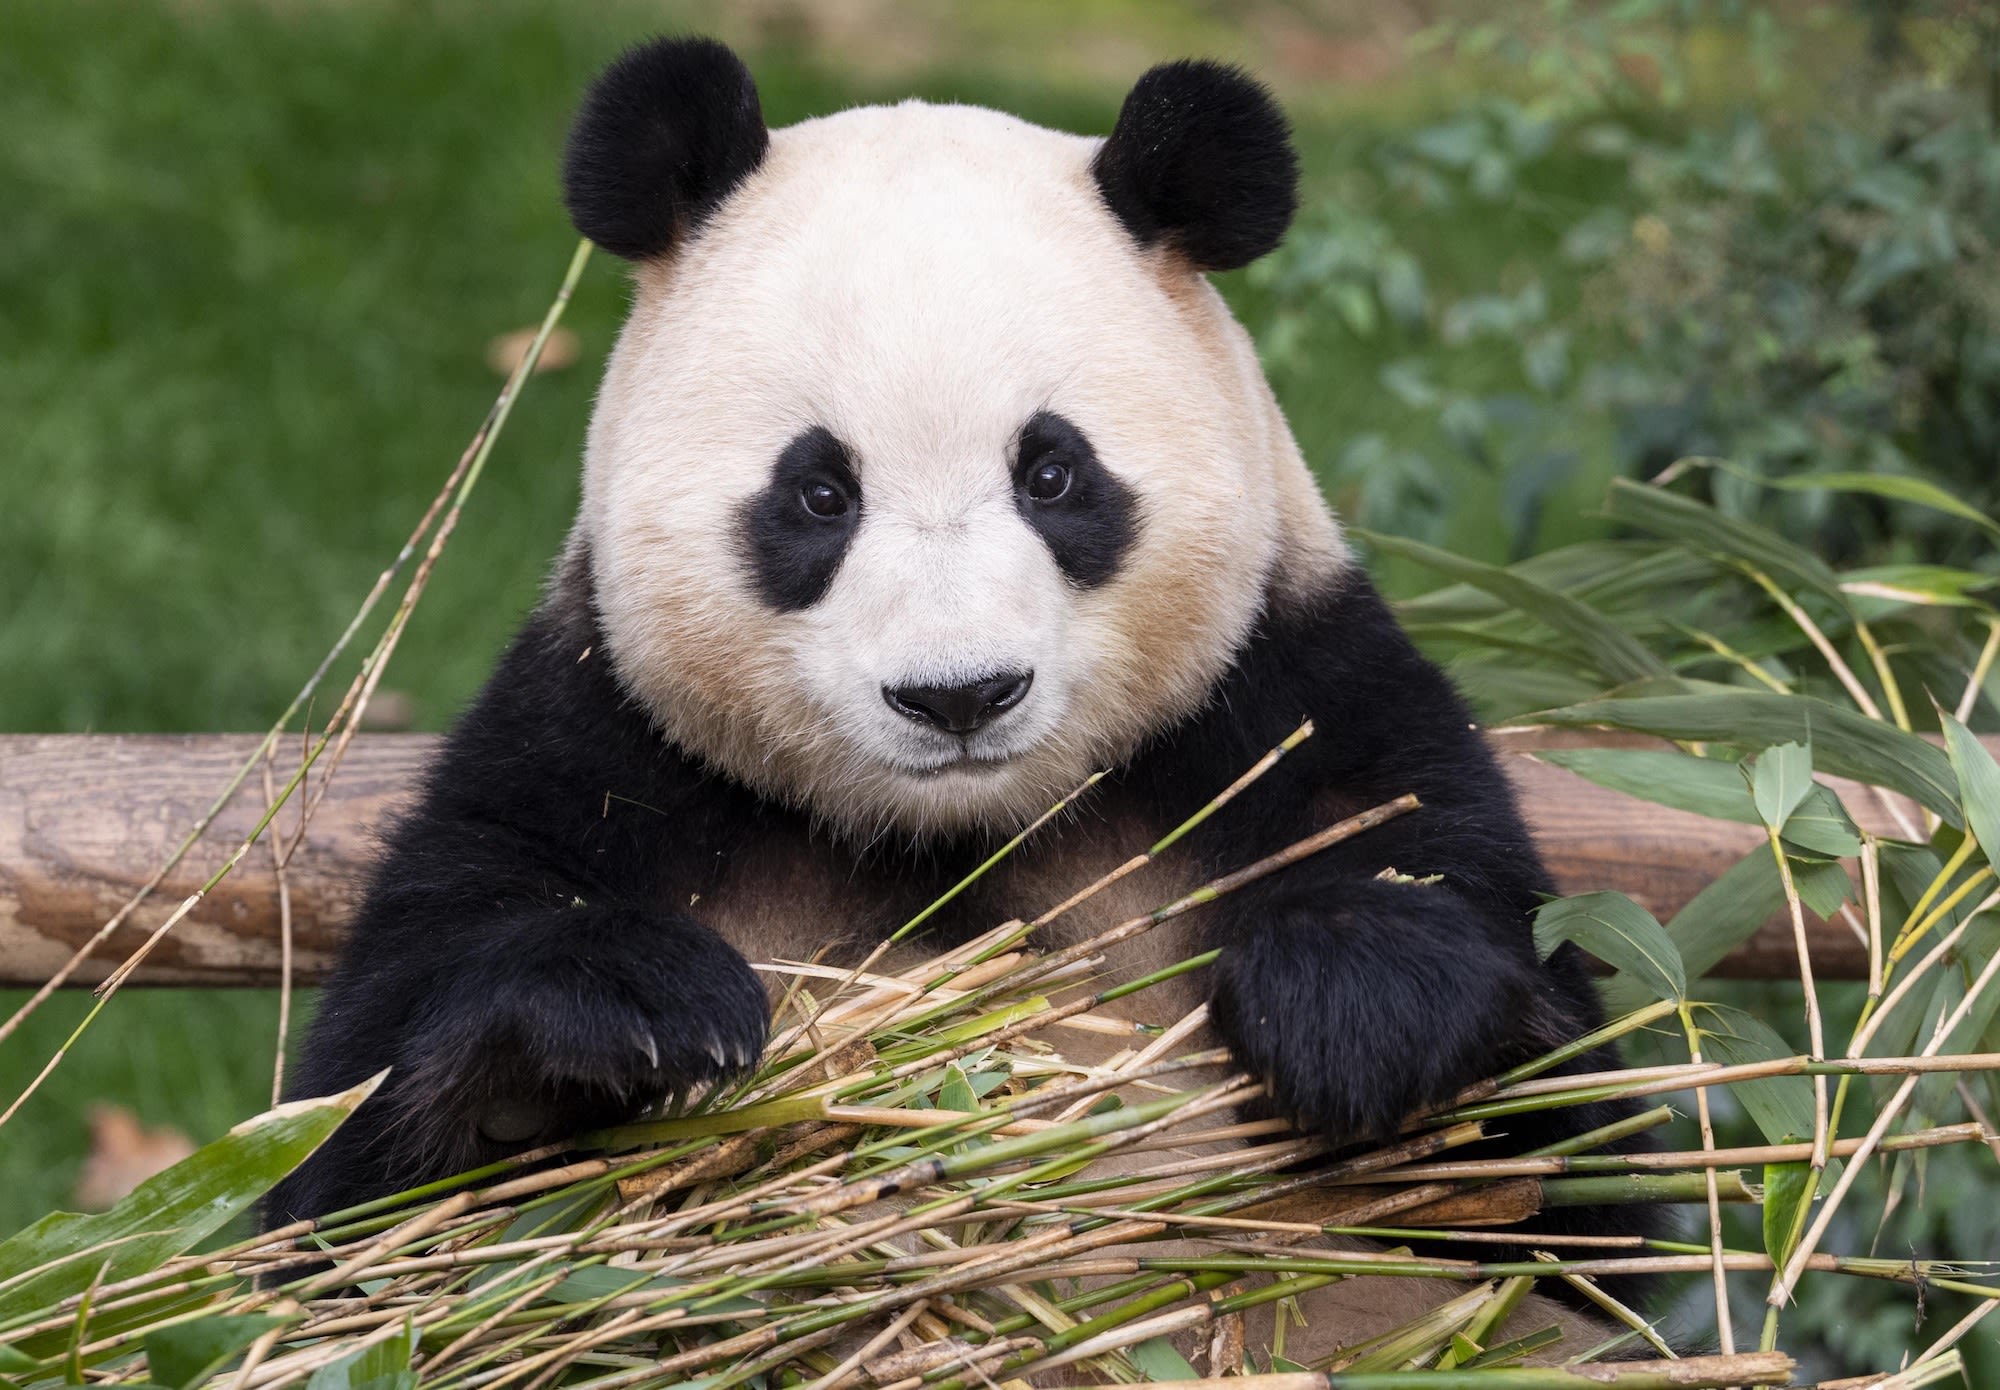 South Koreans mourn as country's first celebrity panda, Fu Bao